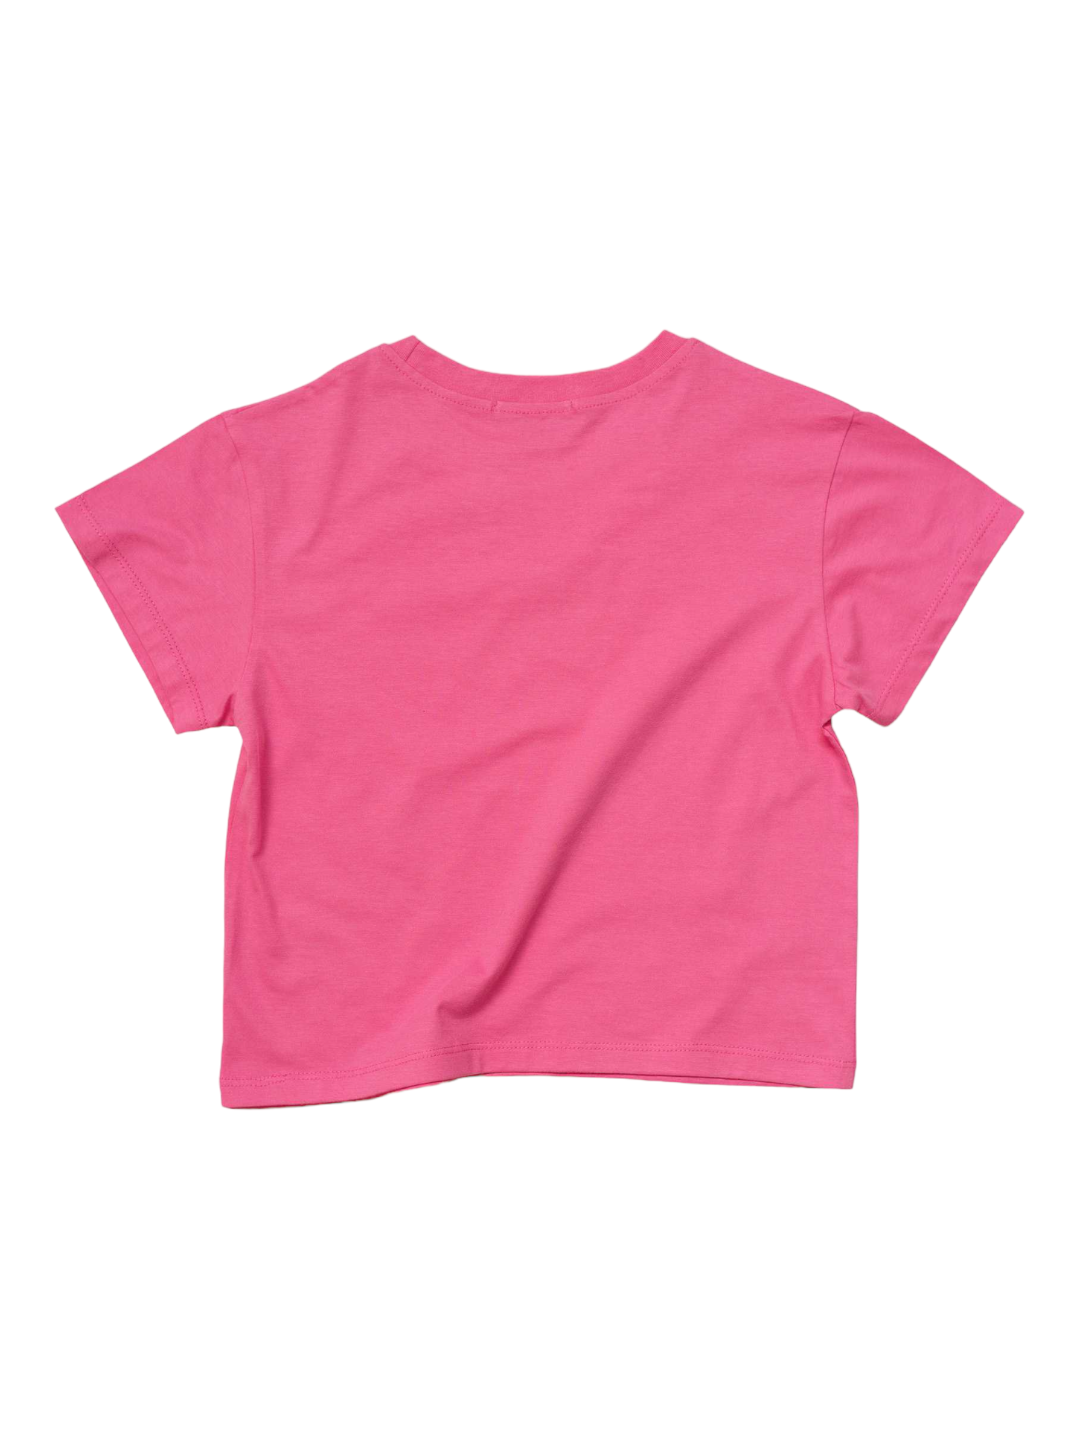 SPORTY LOGO T-SHIRT SMALL FIT IN PINK